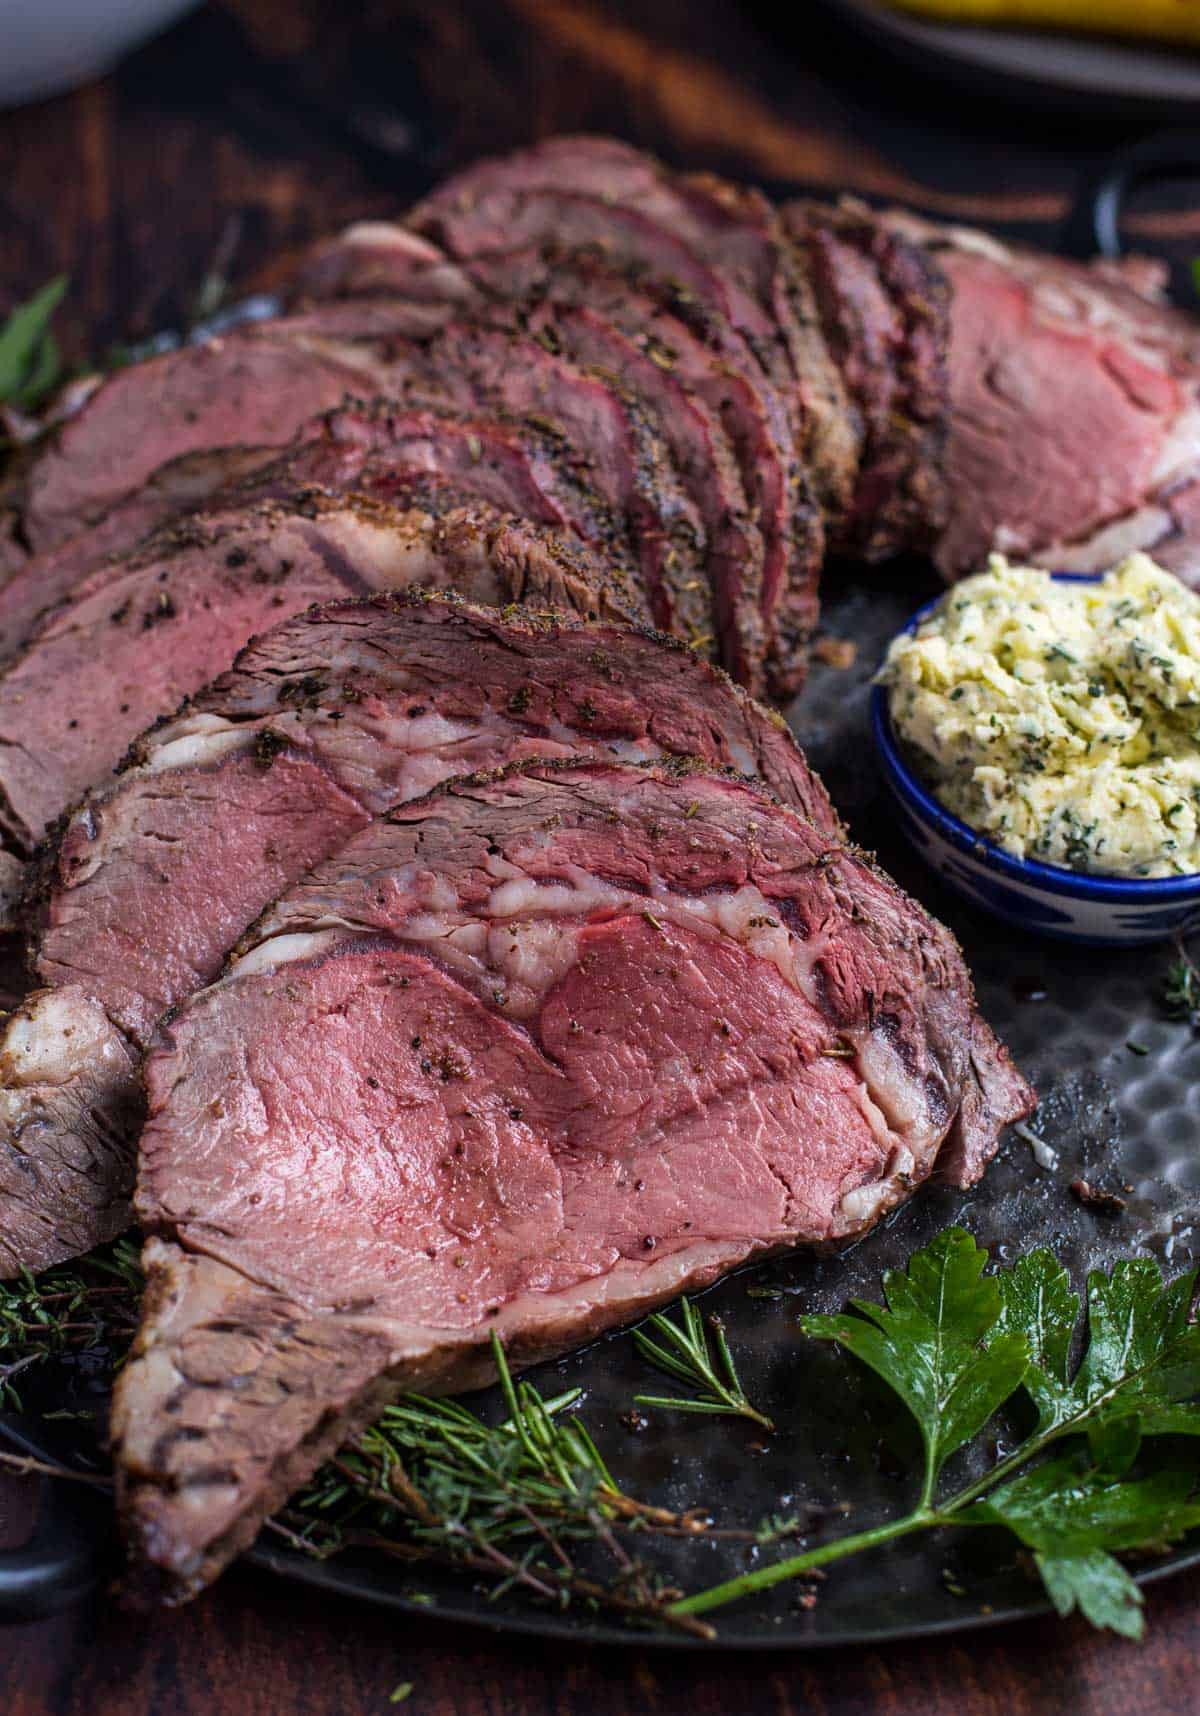 Slices of Grilled Prime Rib on a platter with a bowl of herb compound butter